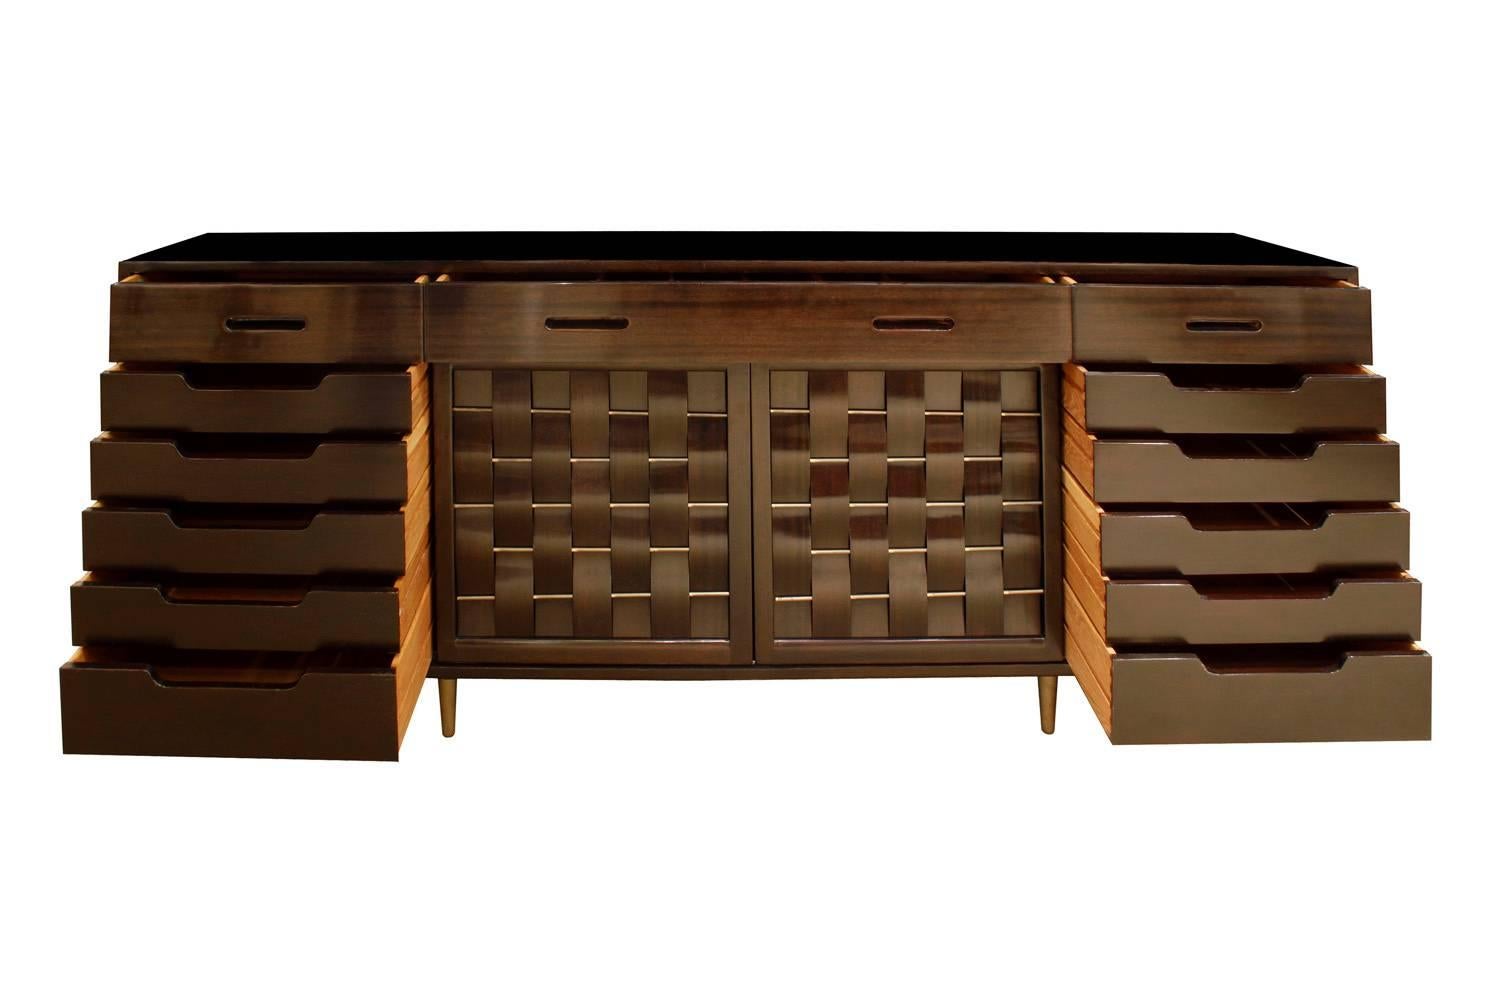 Sideboard model No. 4453 in mahogany with four doors, slats woven over rods, and conical brass legs designed by Edward Wormley for Dunbar, American, 1940s (signed with metal label in drawer).